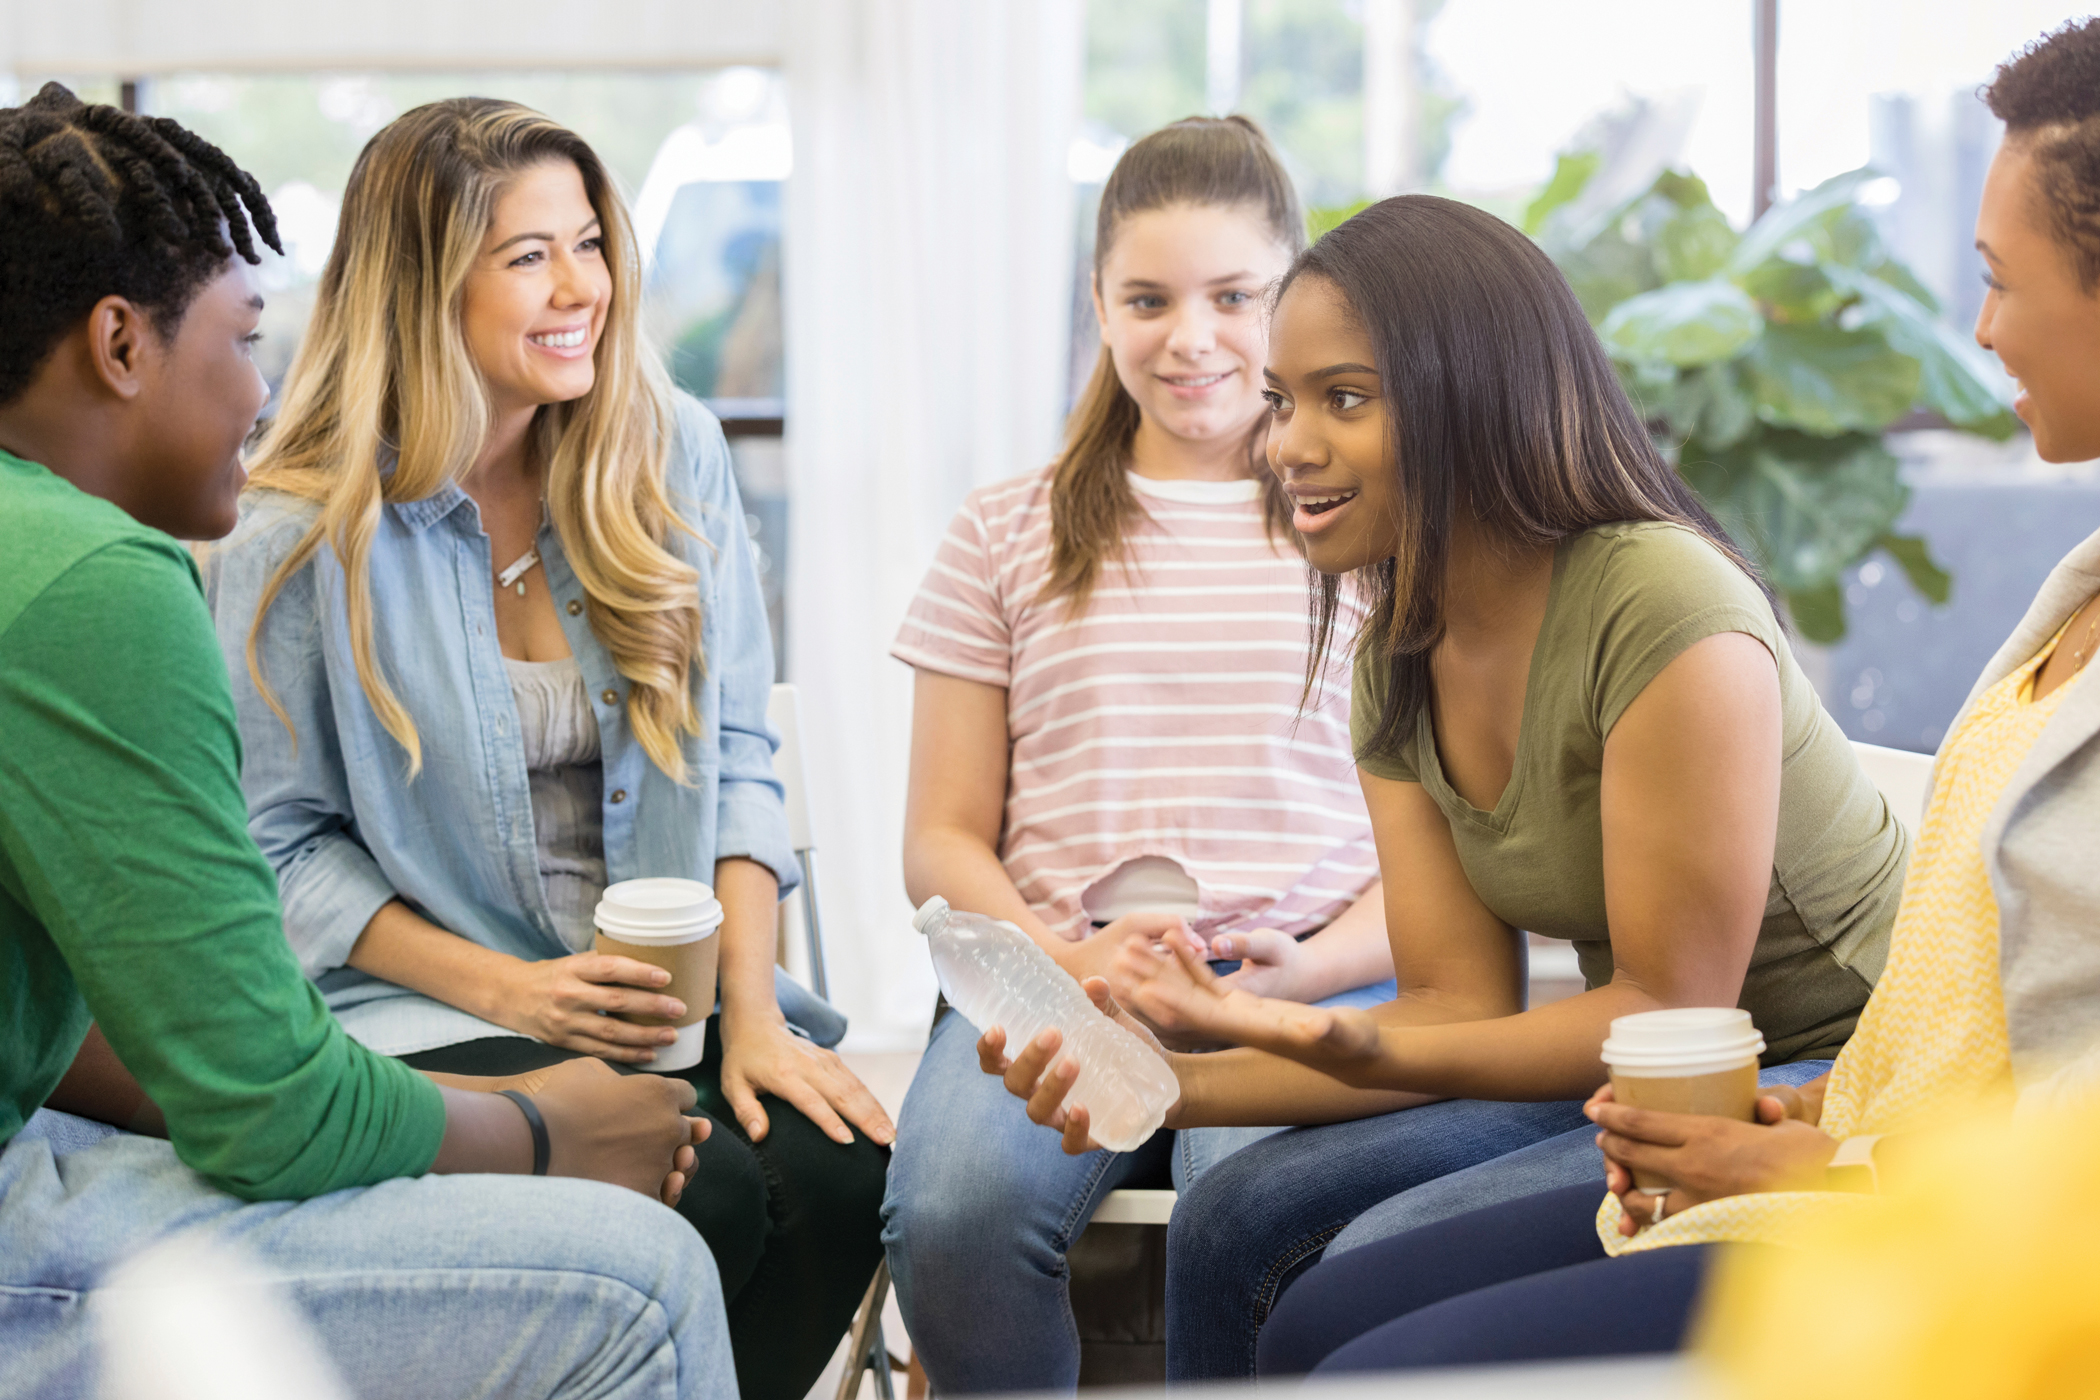 Young Woman Uses Humor When Sharing with Support Group